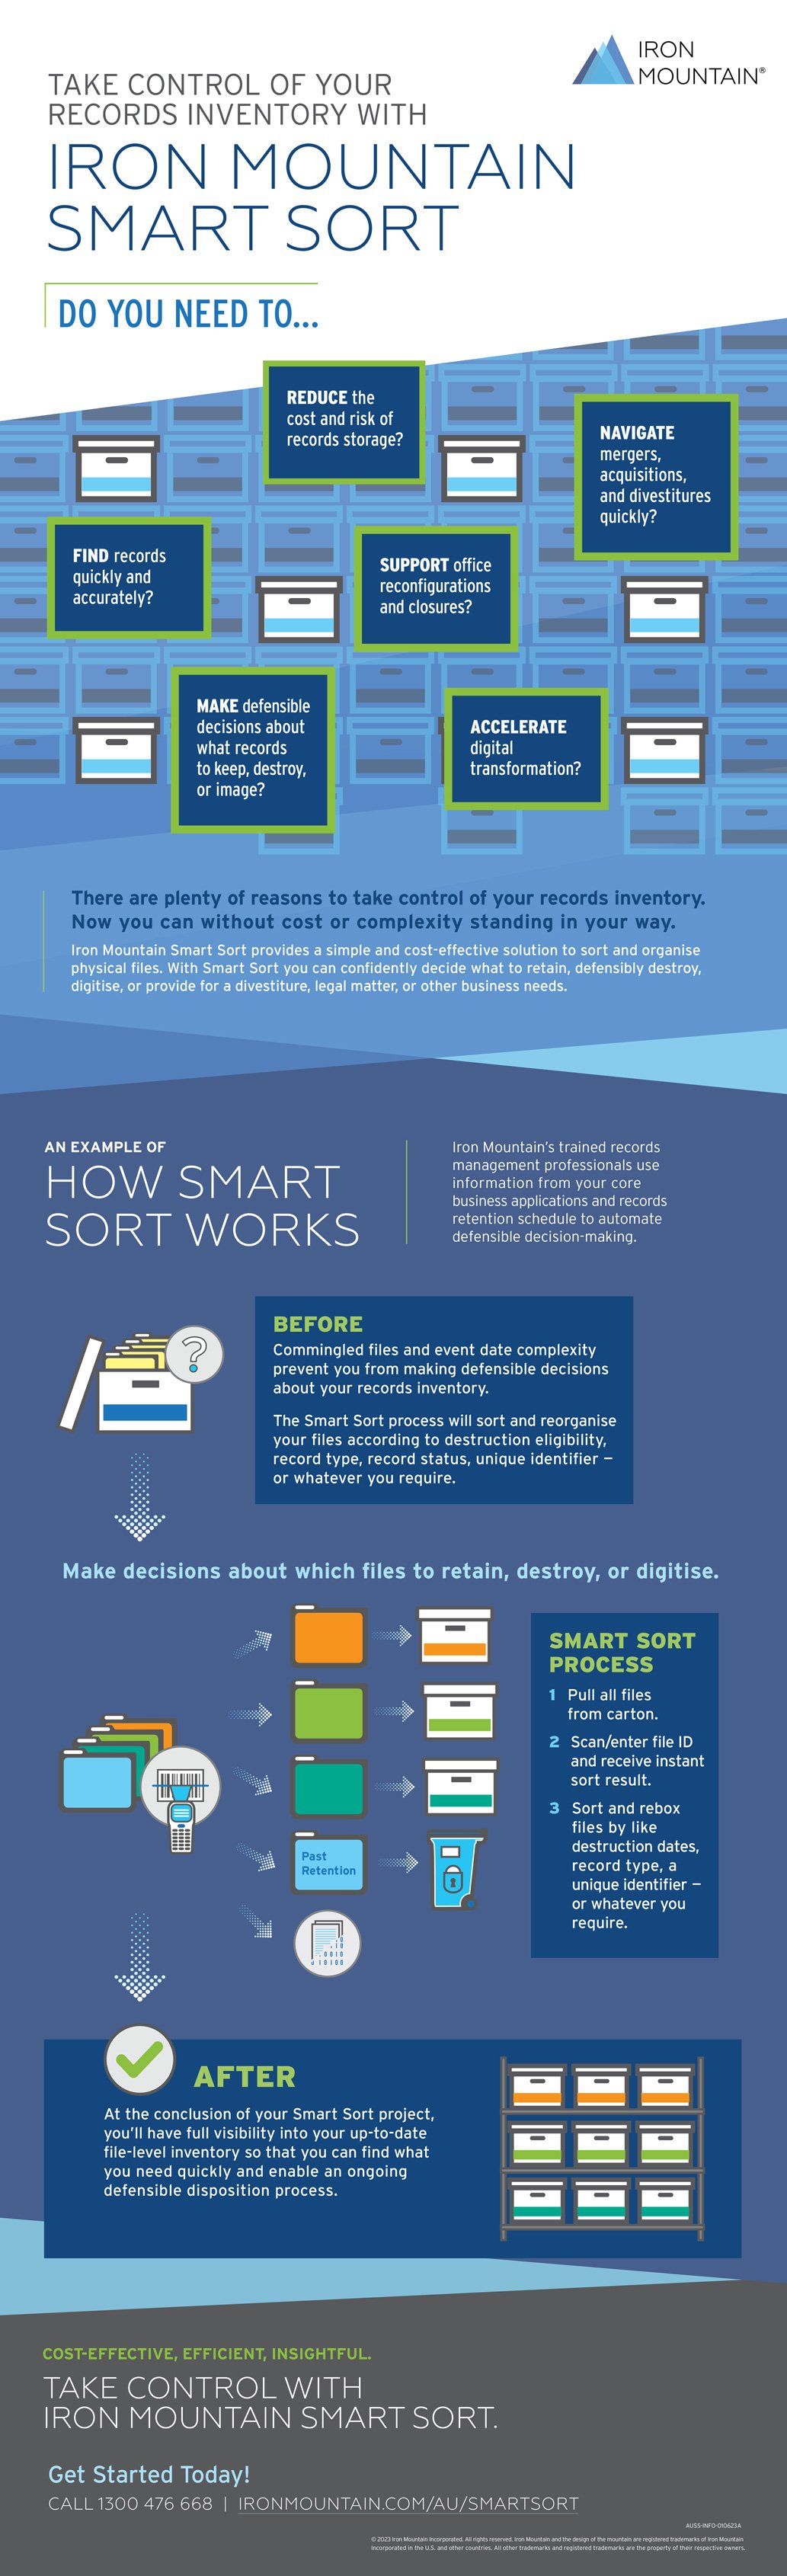 Infographic take control of smart sort